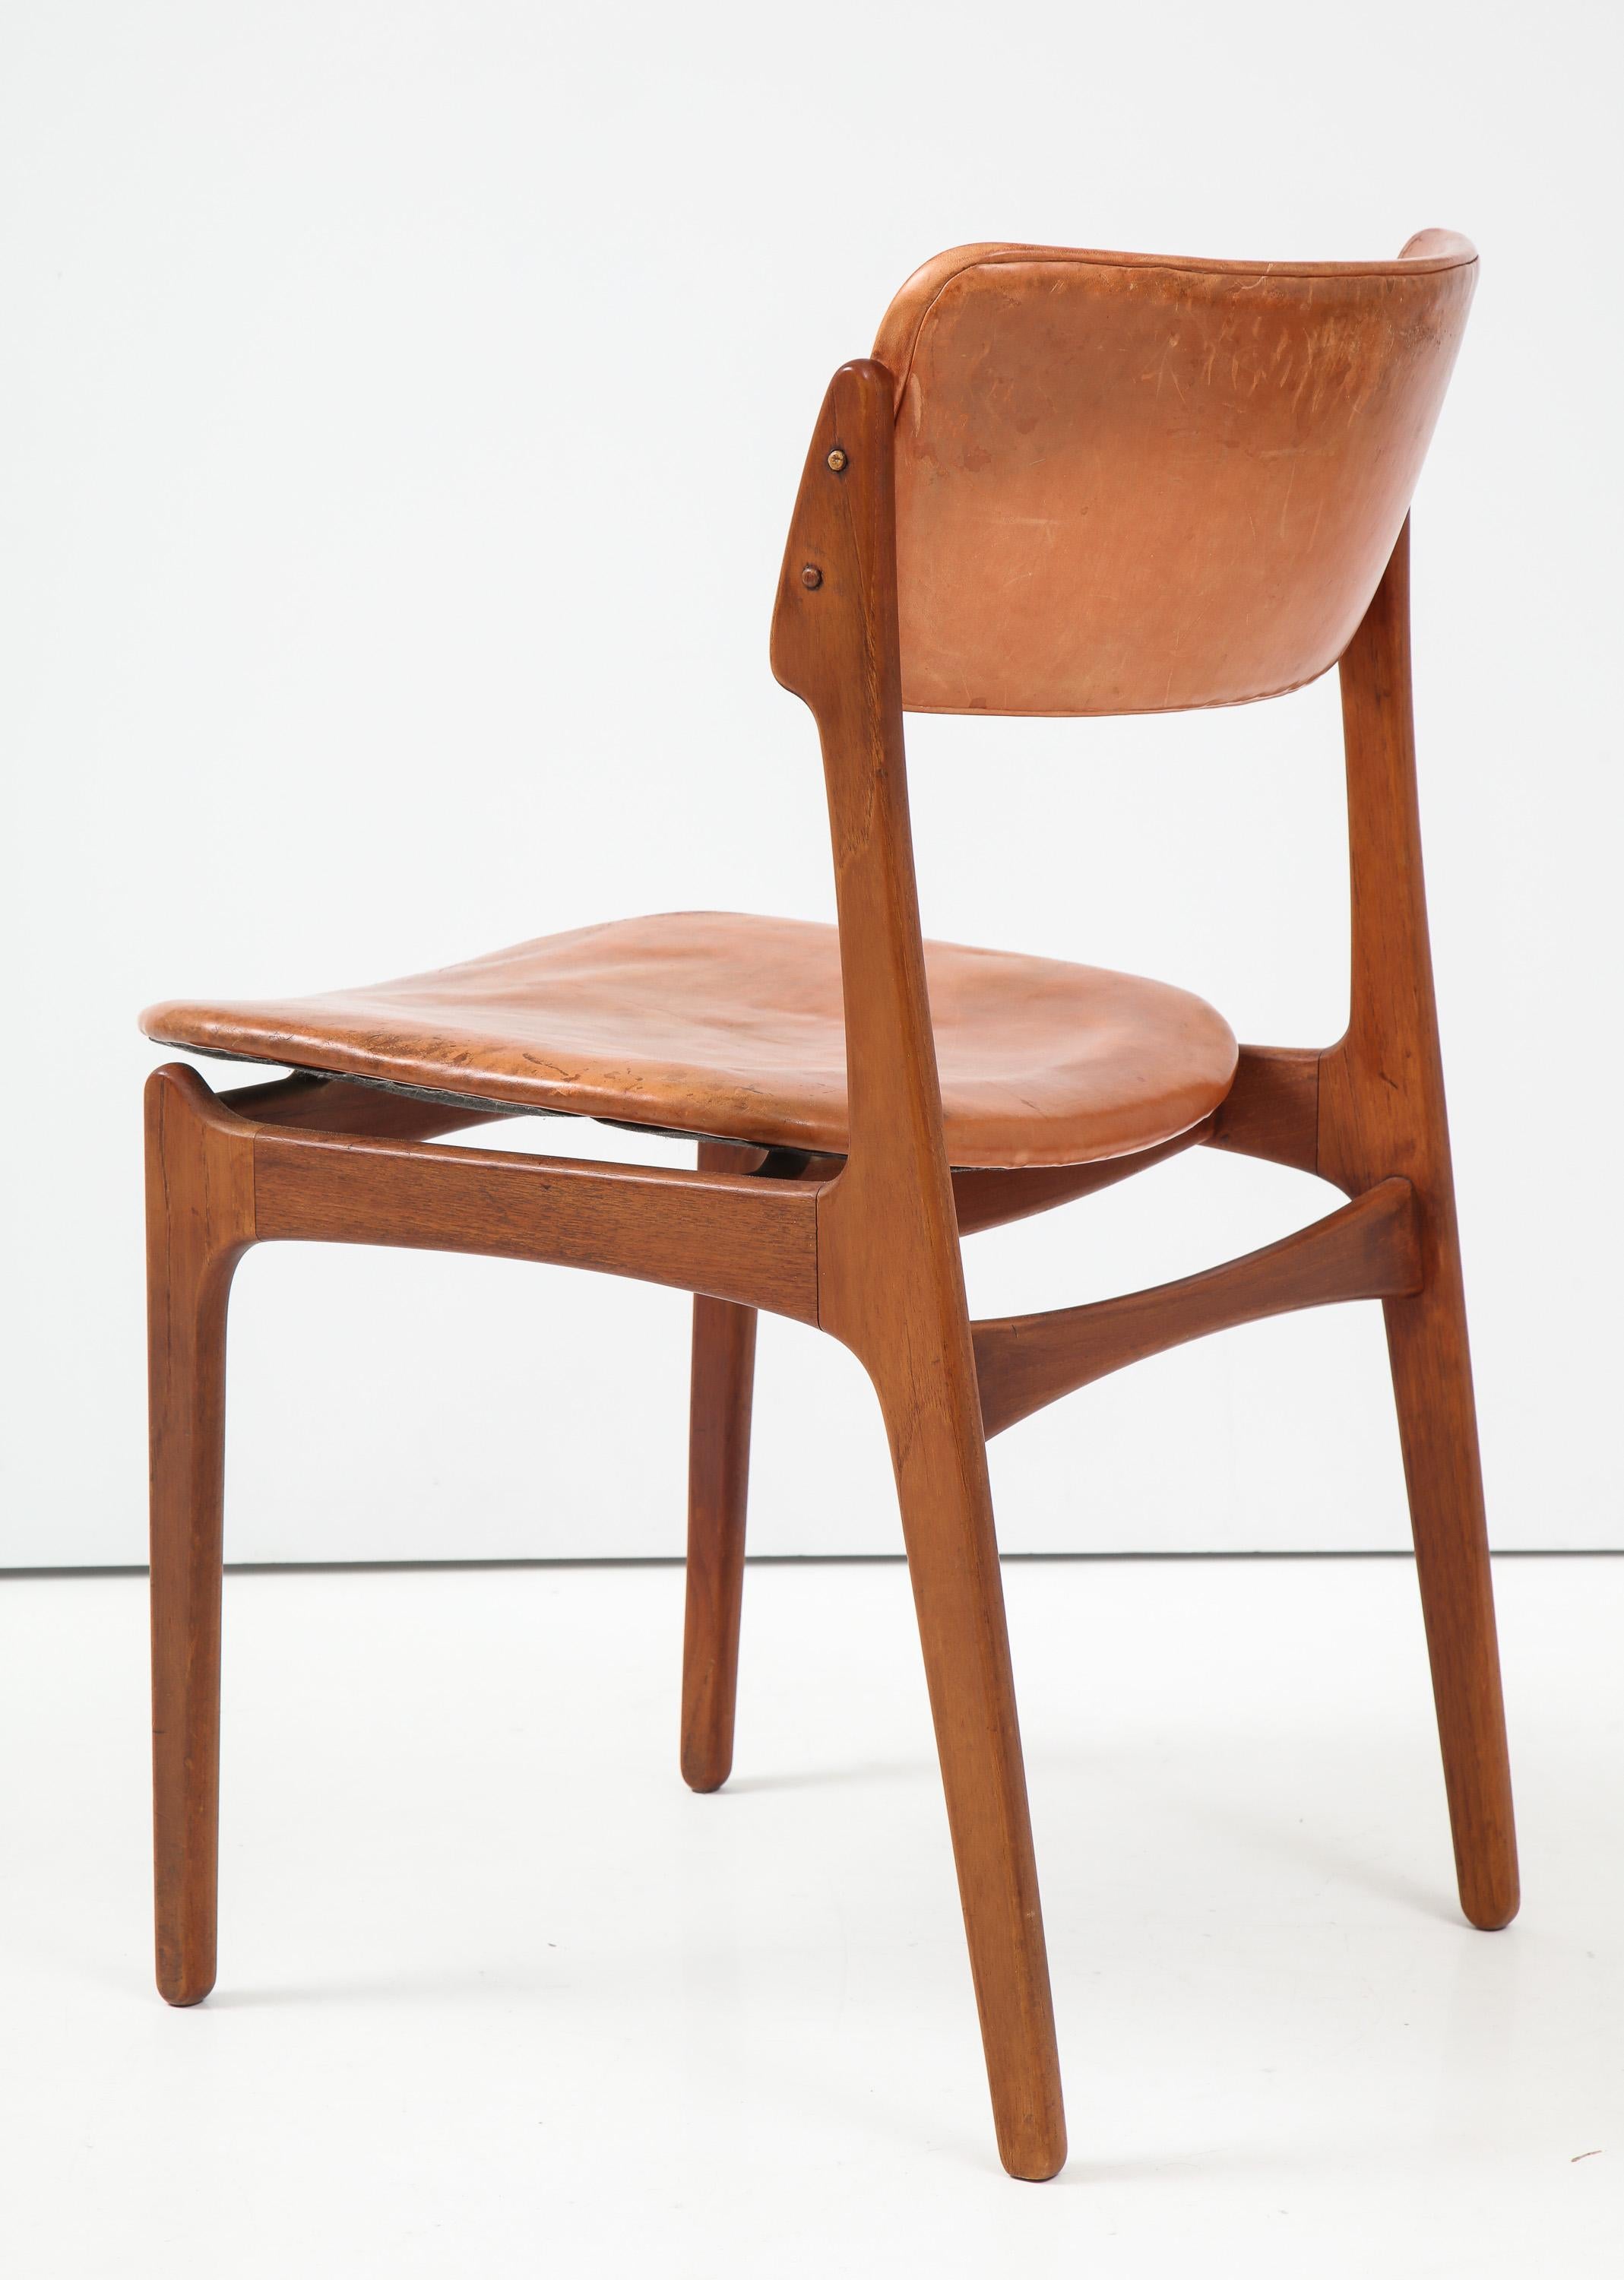 Danish Early Production Erik Buck Teak and Leather Chair